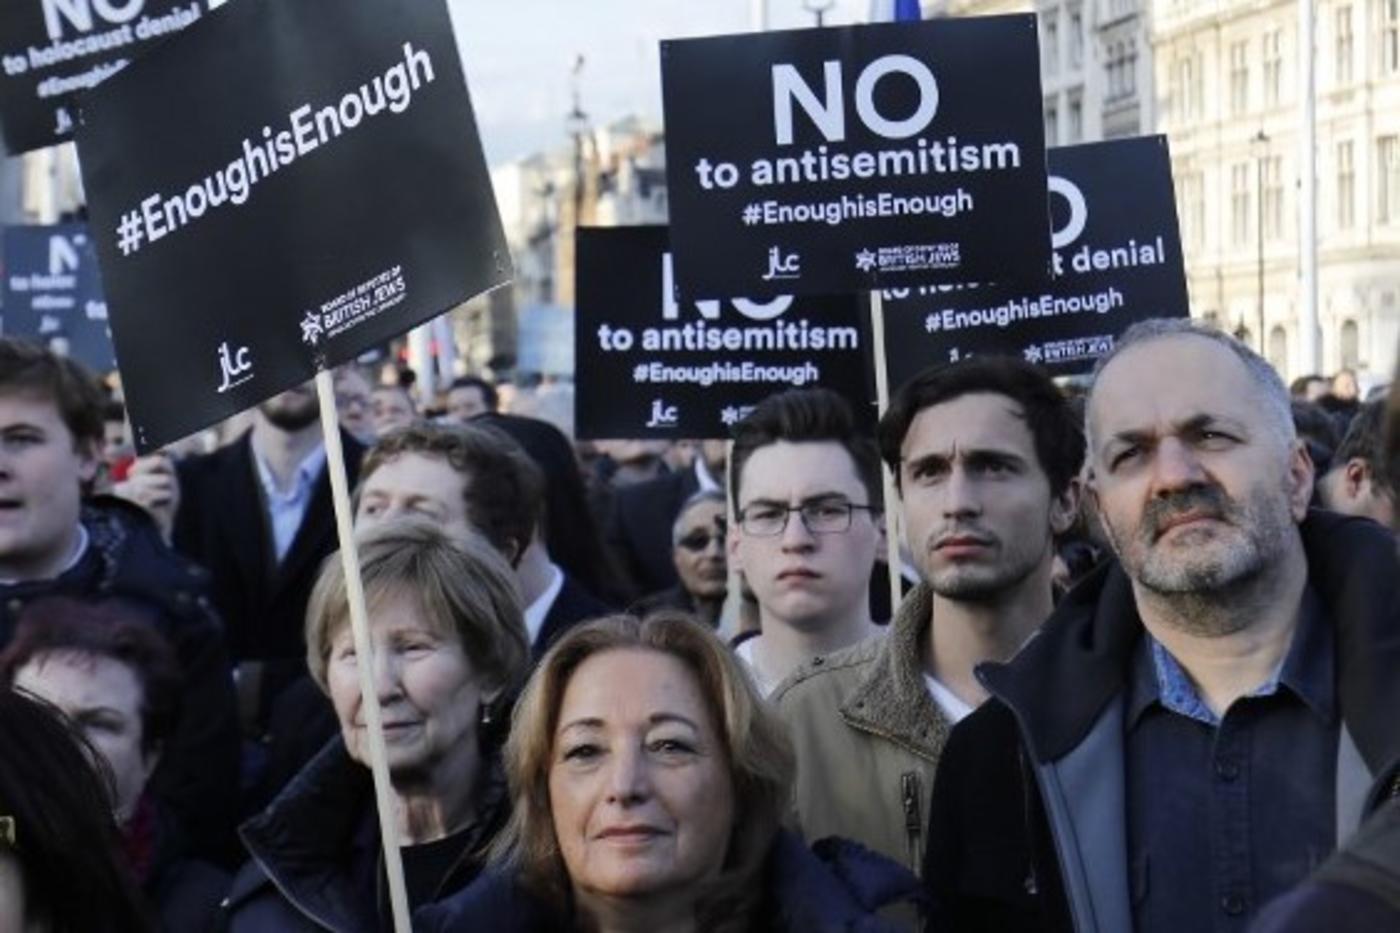 Activists protest against alleged antisemitism in Britain’s Labour Party in 2018 (AFP)